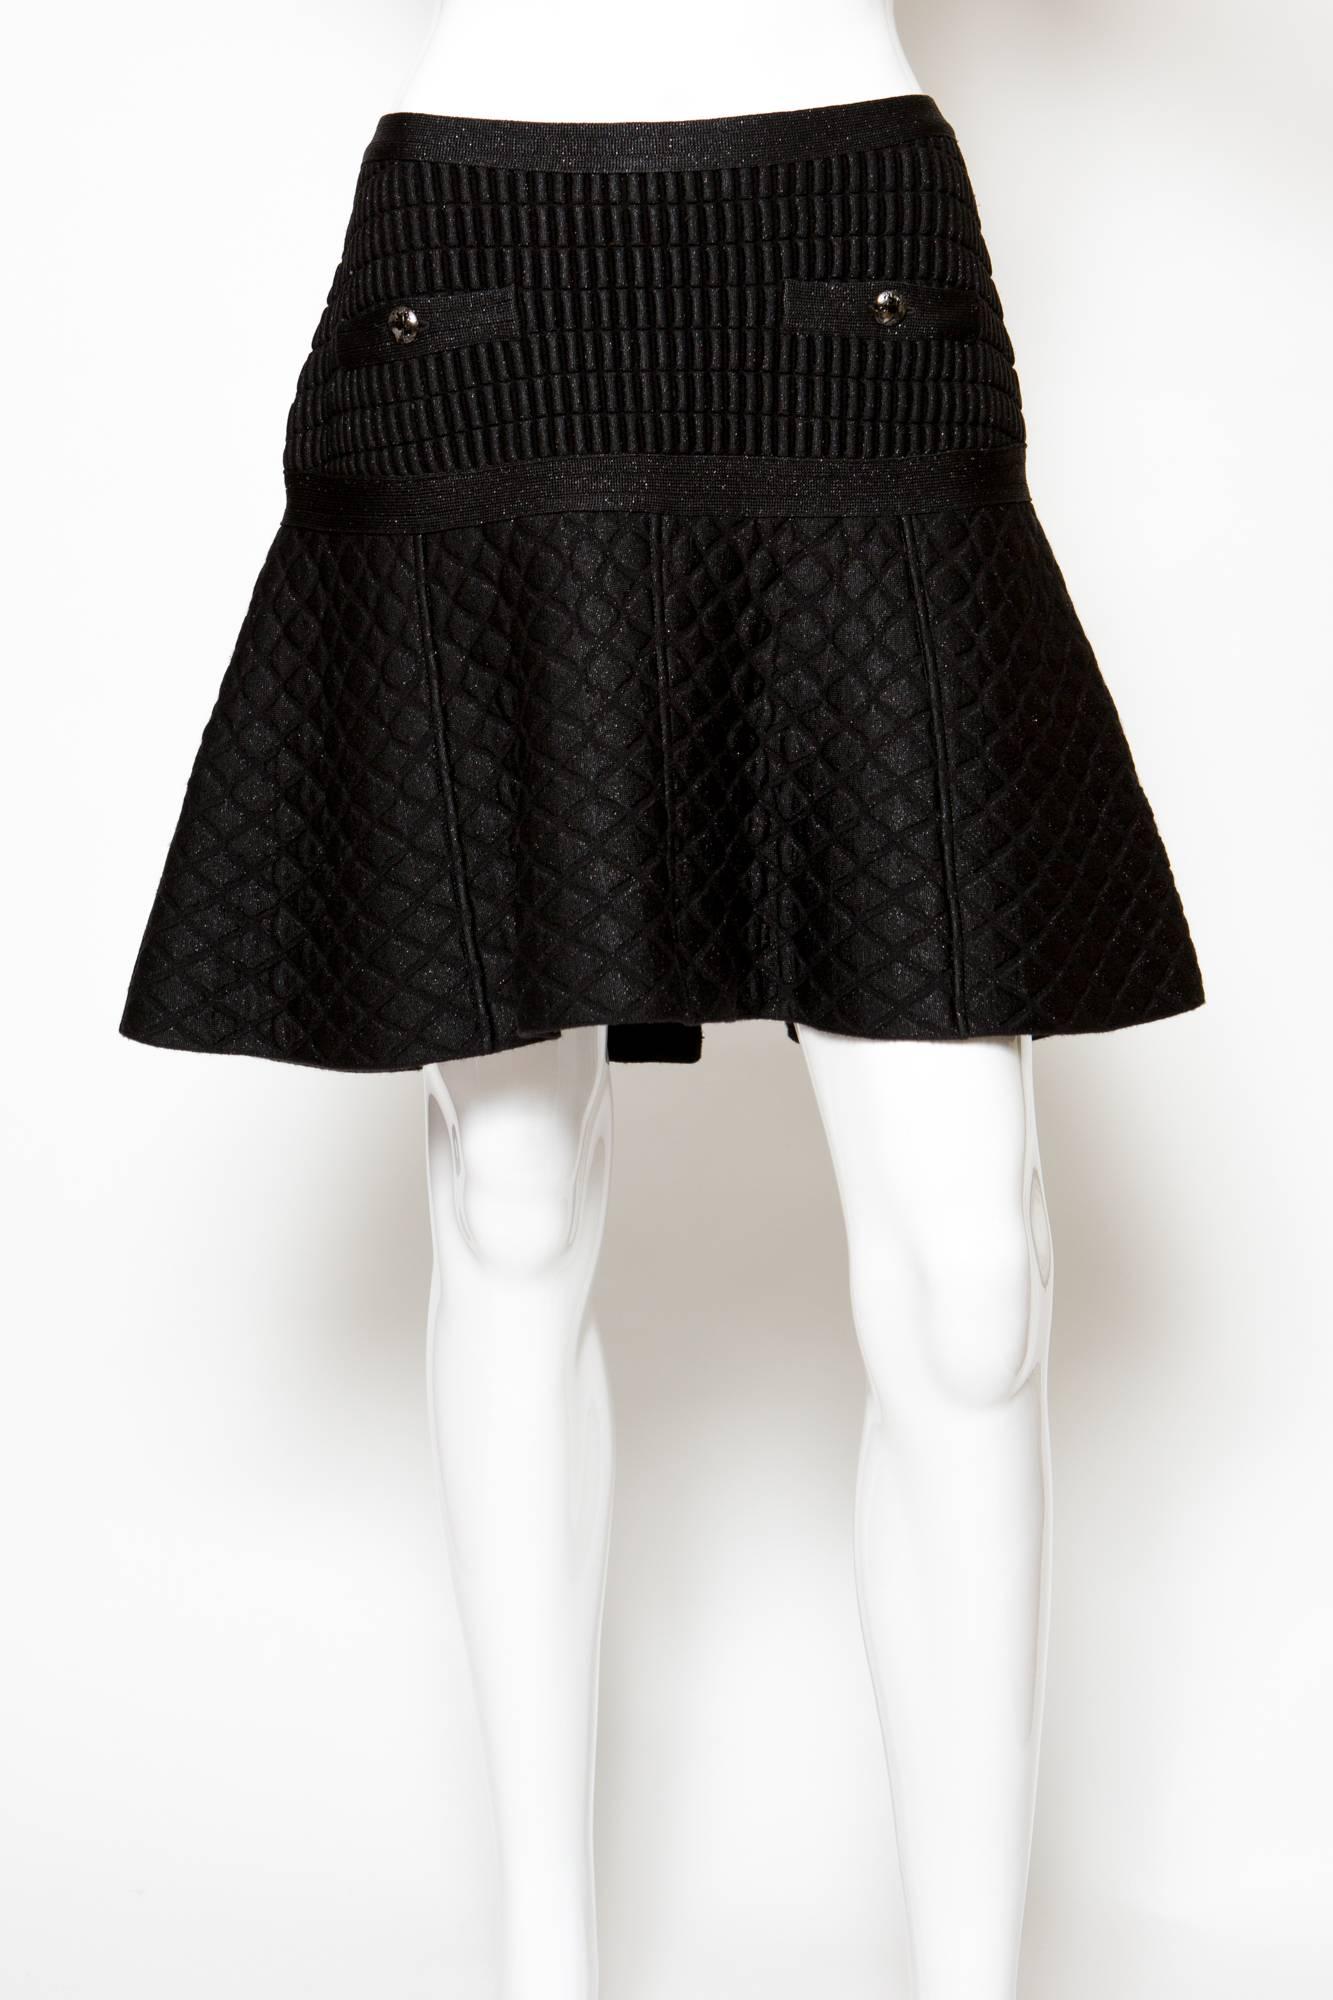 Chanel short black skirt skater featuring a center back zip, front pockets with decorative buttons, a fancy mix wool and polypropylene textured fabric. 
Label size Chanel: 38fr
Estimated size: 36fr
